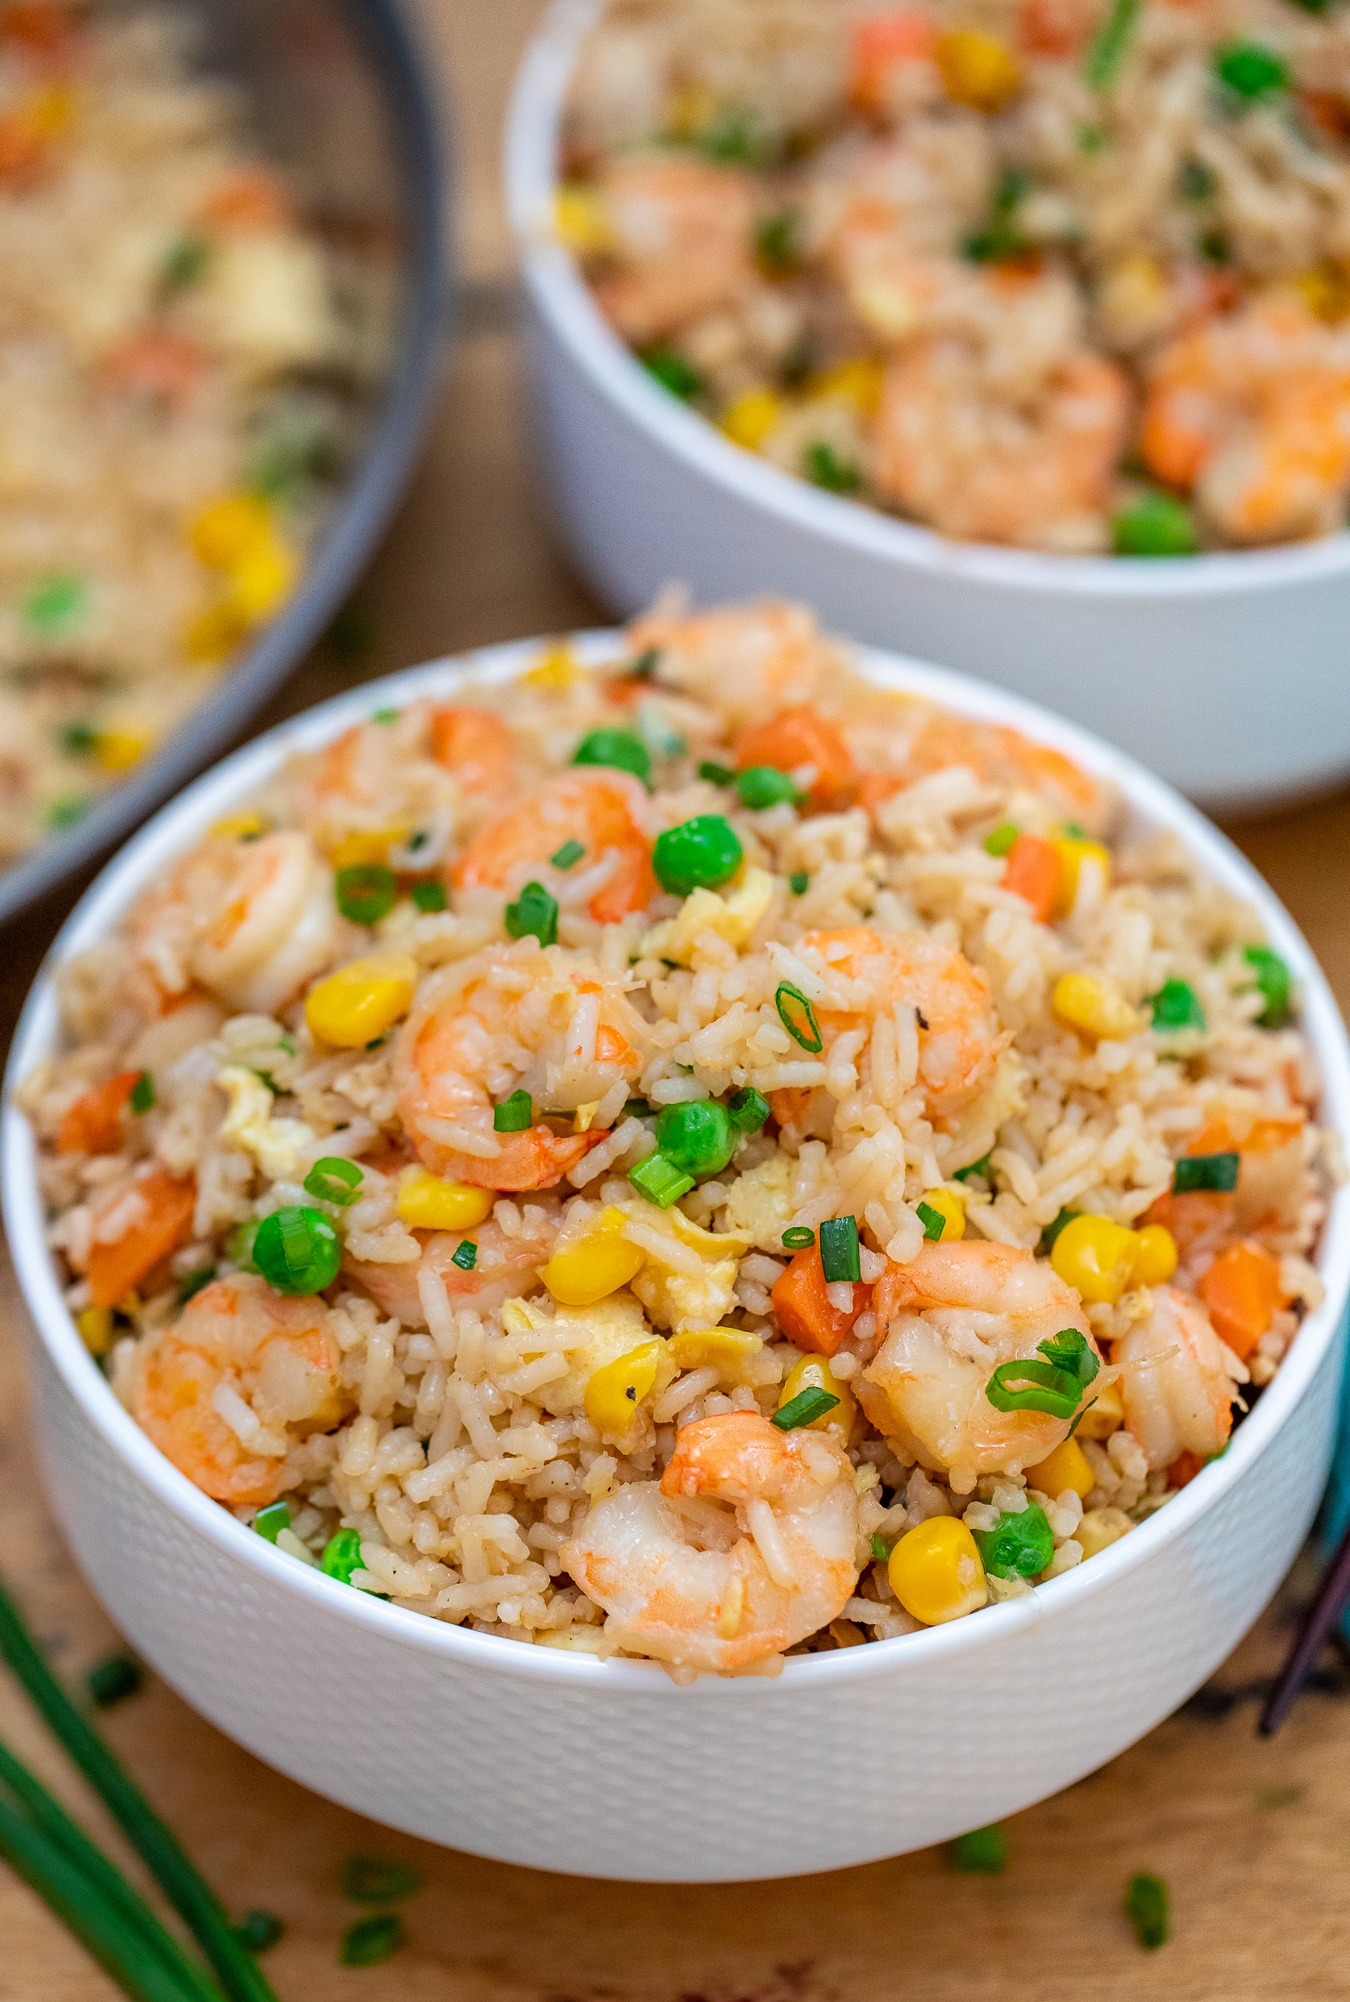 Shrimp Fried Rice Recipe 30 Minutes Meals,Baked Ziti With Ricotta No Meat